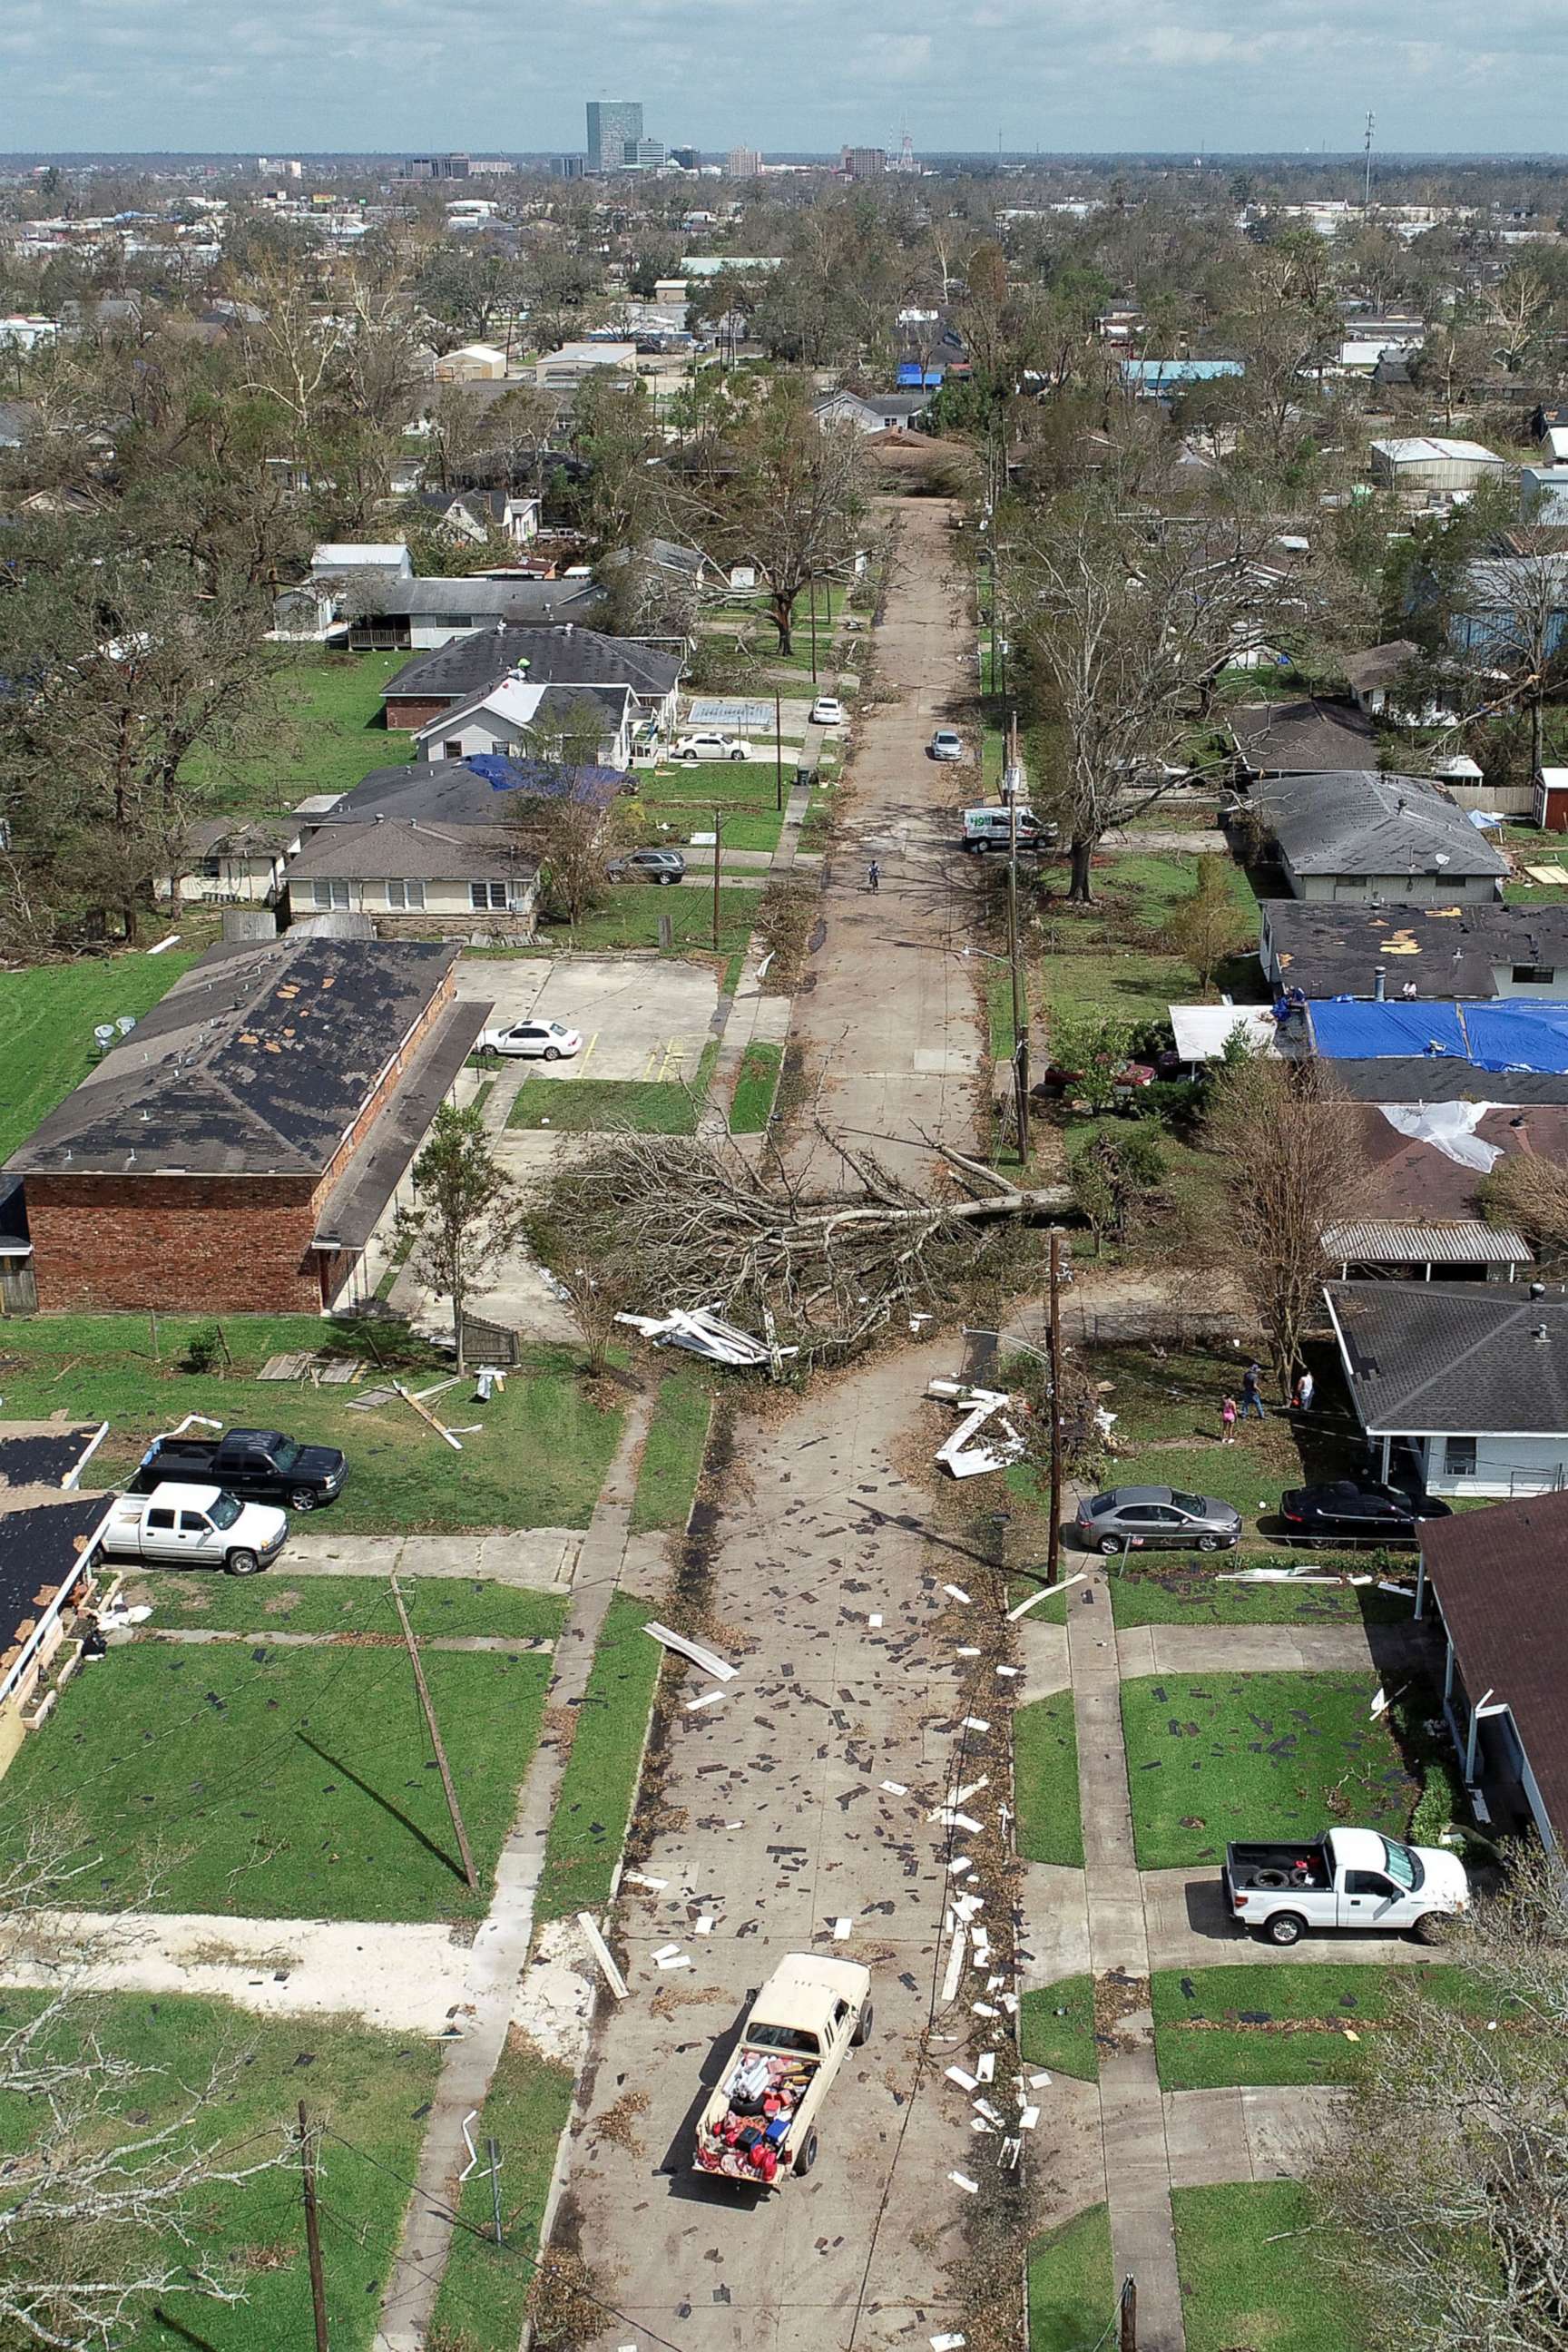 PHOTO: A tree knocked over by Hurricane Laura blocks a residential street in an aerial photograph in Lake Charles, Aug. 30, 2020.